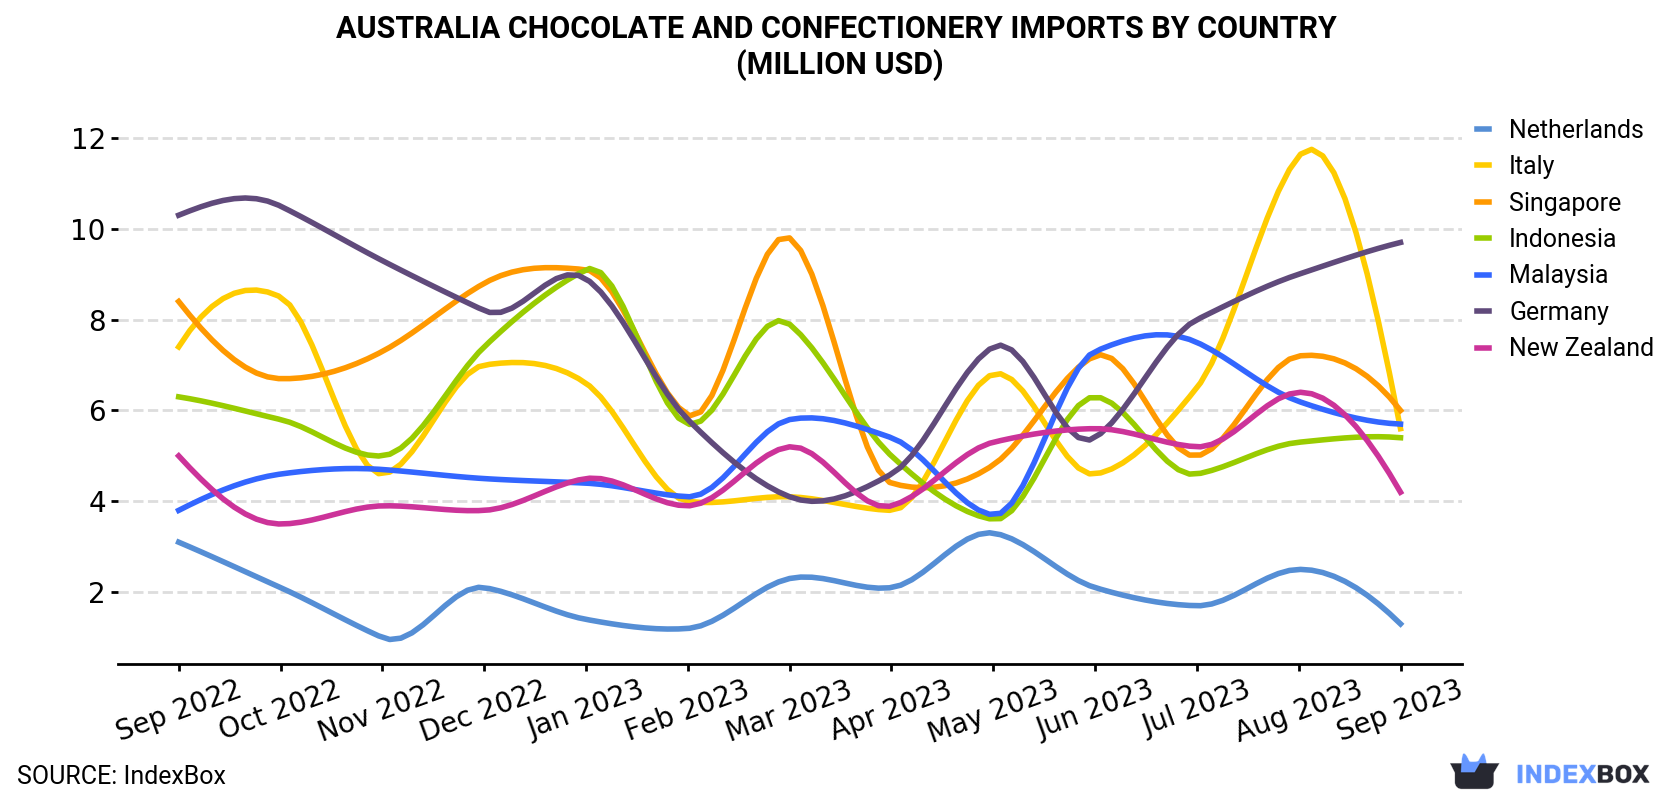 Australia Chocolate And Confectionery Imports By Country (Million USD)